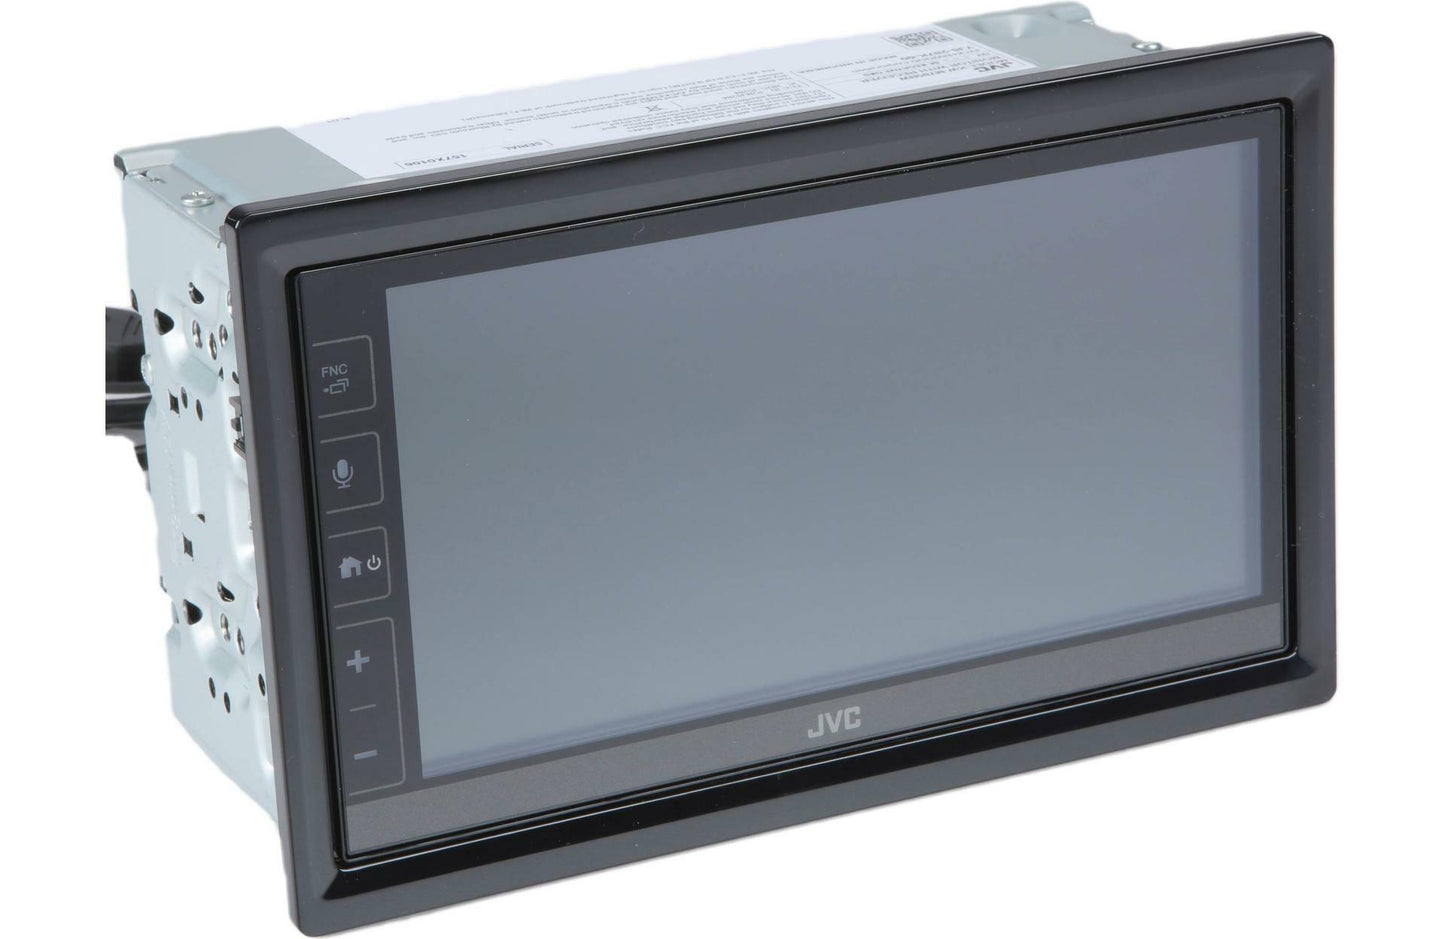 JVC KW-M785BW Digital Media Receiver - 6.8-inch Capacitive Touch Control Monitor